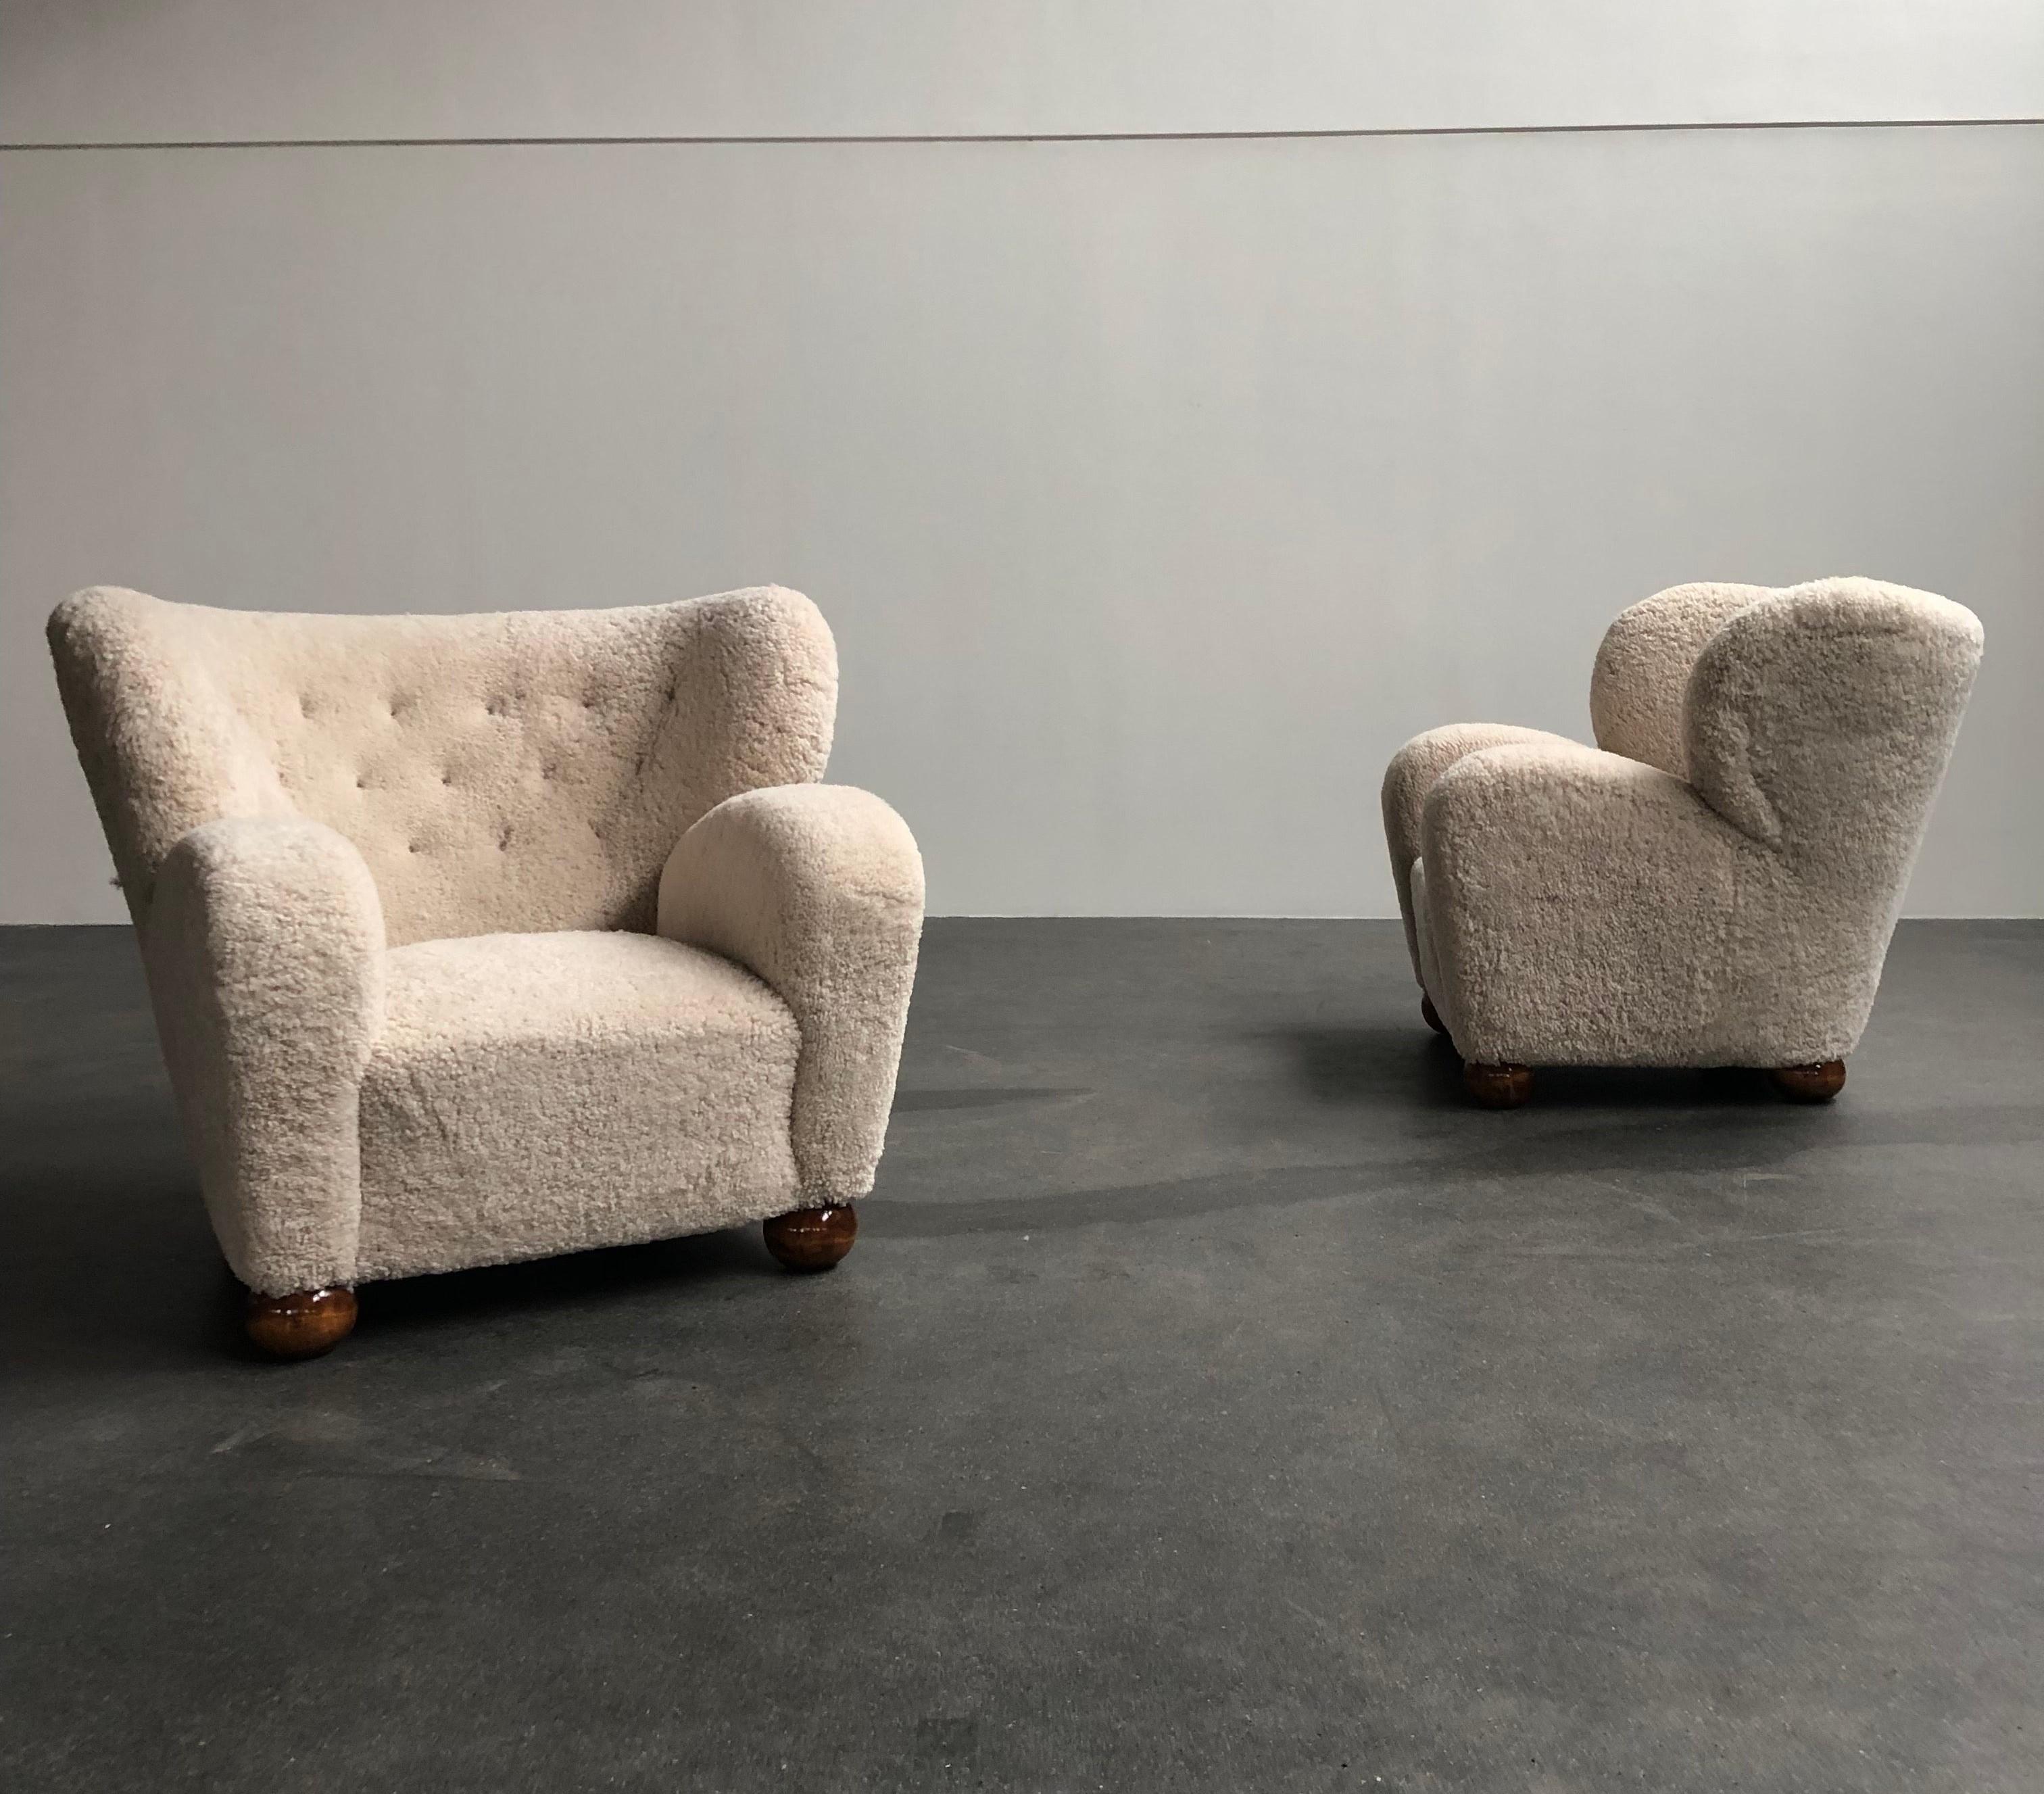 Pair of large Märta Blomstedt easy chairs. Legs in stained ash and upholstered in sheepskin. Model designed for Hotel Aulanko, Finland, 1939.

The chairs are newly refinished an upholstered in sheepskin.

Price is for the pair.